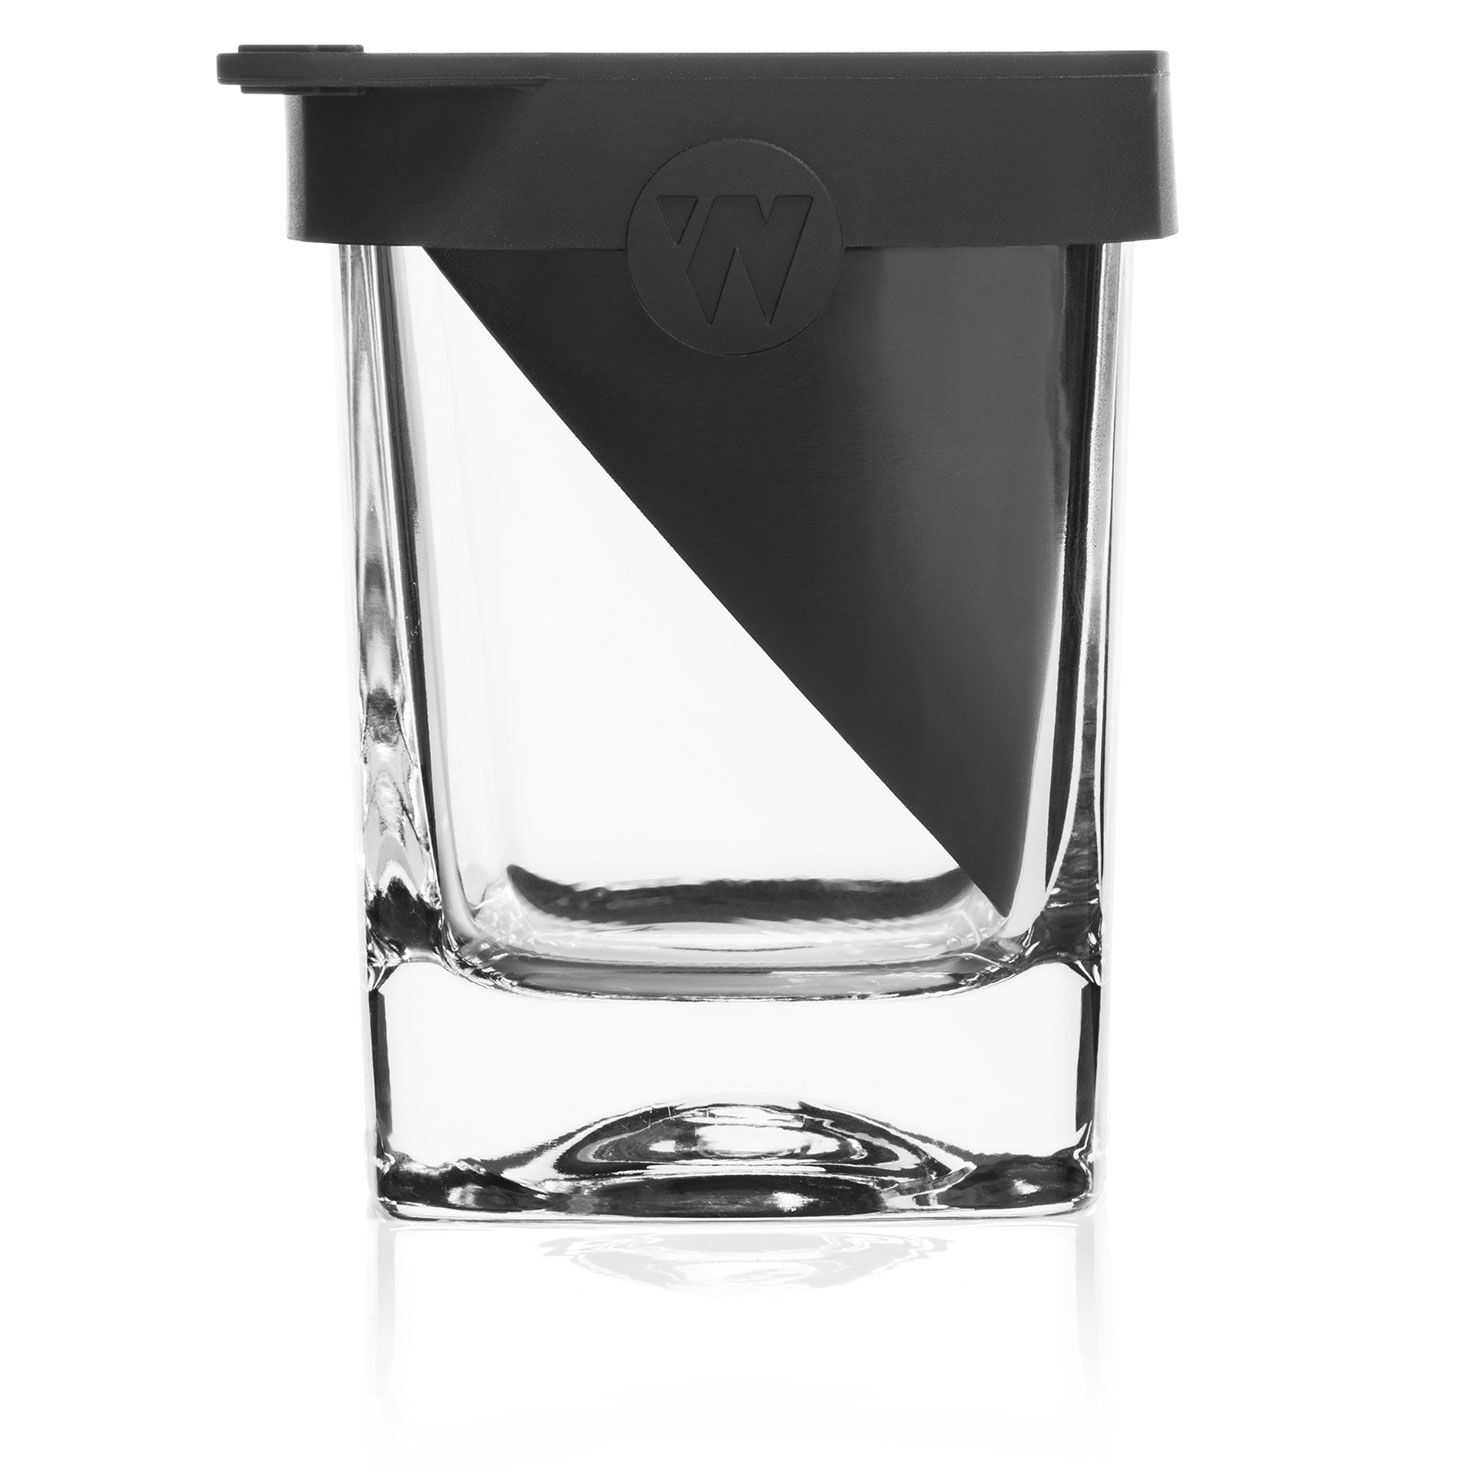 https://www.hallmark.com/dw/image/v2/AALB_PRD/on/demandware.static/-/Sites-hallmark-master/default/dw277ecf93/images/finished-goods/products/7001/Corkcicle-Whiskey-Wedge-Lowball-Glass_7001_01.jpg?sfrm=jpg